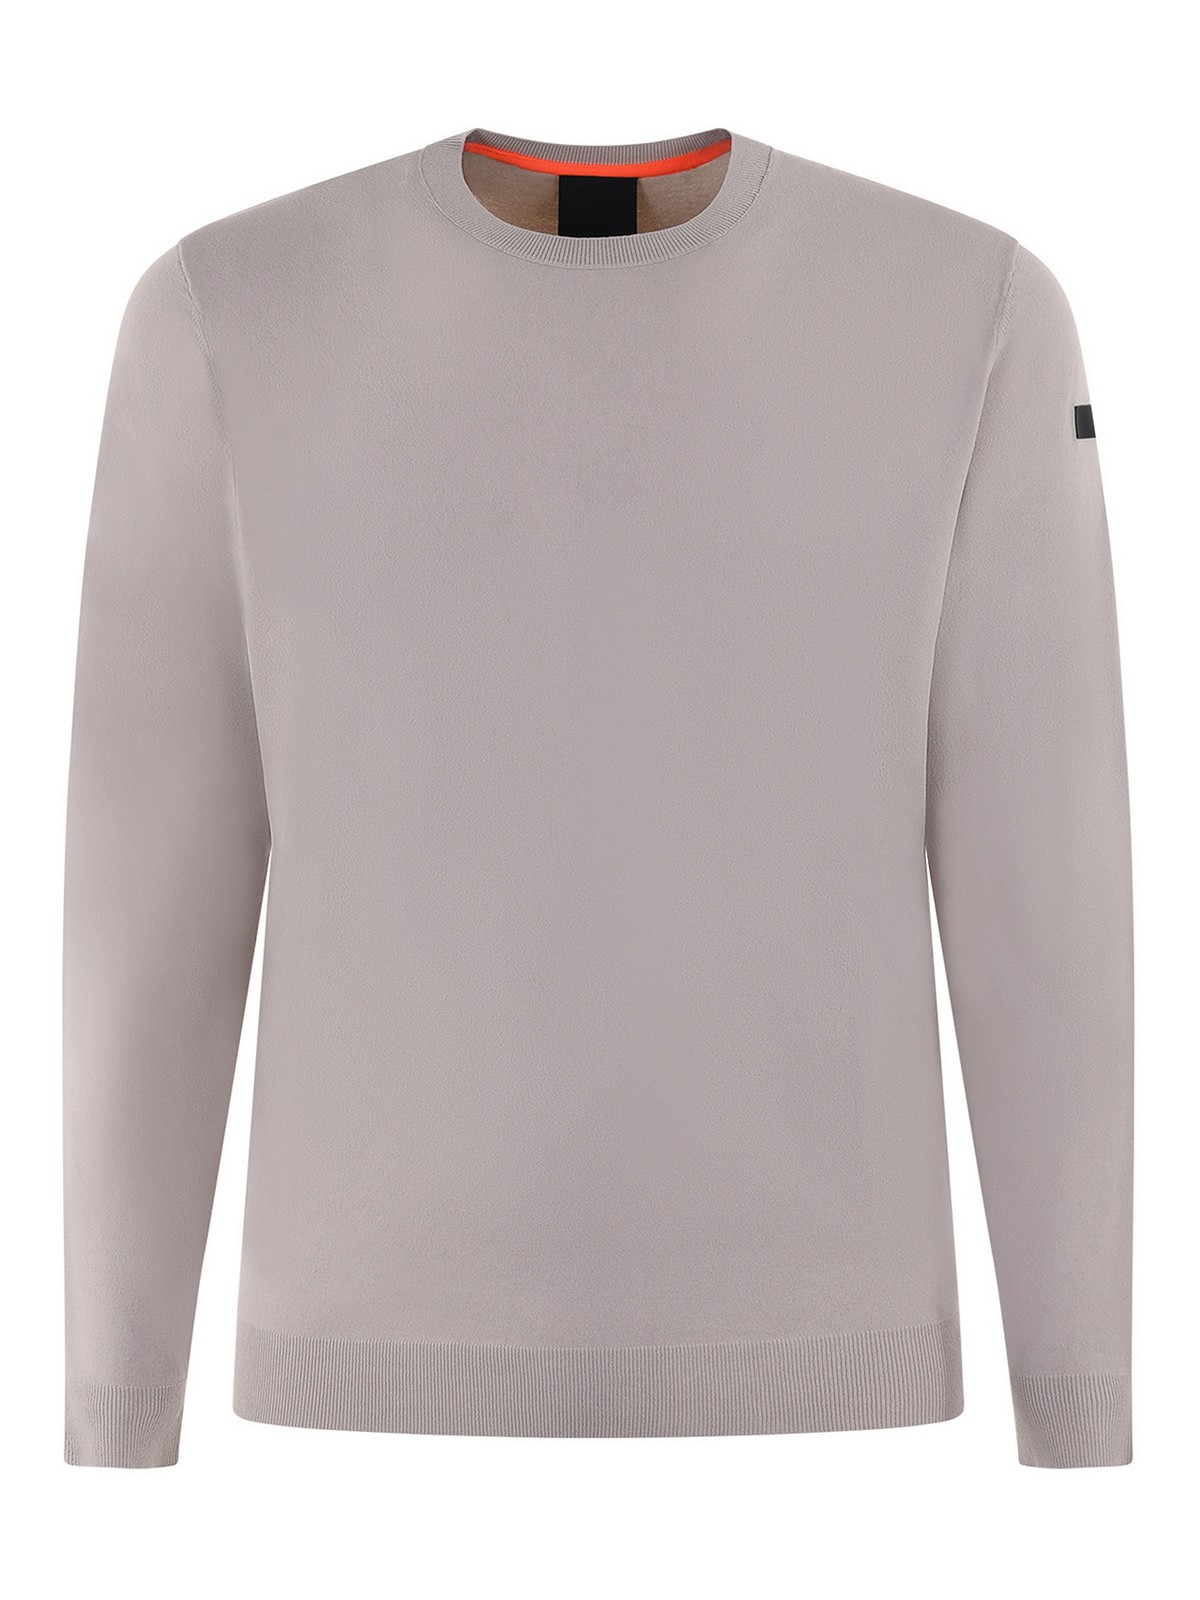 Rrd Roberto Ricci Designs Ribbed Crewneck Sweater With Logo In Beige